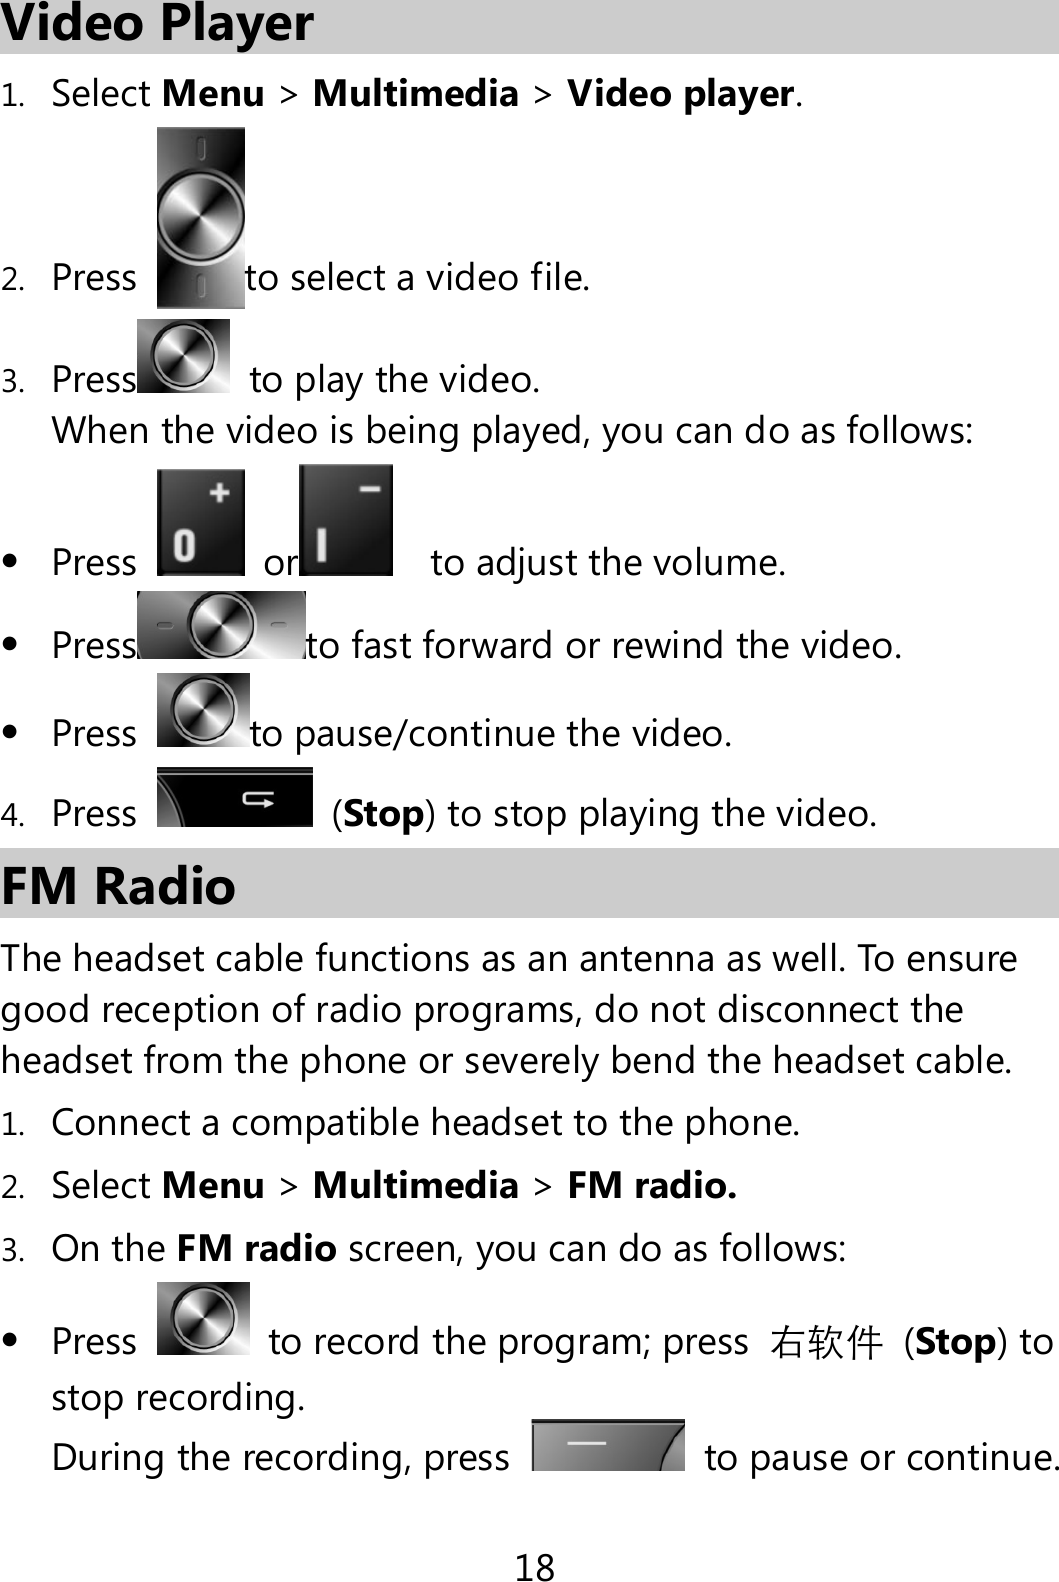 18 Video Player 1. Select Menu &gt; Multimedia &gt; Video player. 2. Press  to select a video file. 3. Press  to play the video.   When the video is being played, you can do as follows:  Press  or    to adjust the volume.  Press to fast forward or rewind the video.  Press  to pause/continue the video. 4. Press   (Stop) to stop playing the video. FM Radio The headset cable functions as an antenna as well. To ensure good reception of radio programs, do not disconnect the headset from the phone or severely bend the headset cable. 1. Connect a compatible headset to the phone. 2. Select Menu &gt; Multimedia &gt; FM radio. 3. On the FM radio screen, you can do as follows:  Press    to record the program; press  右软件 (Stop) to stop recording. During the recording, press    to pause or continue. 